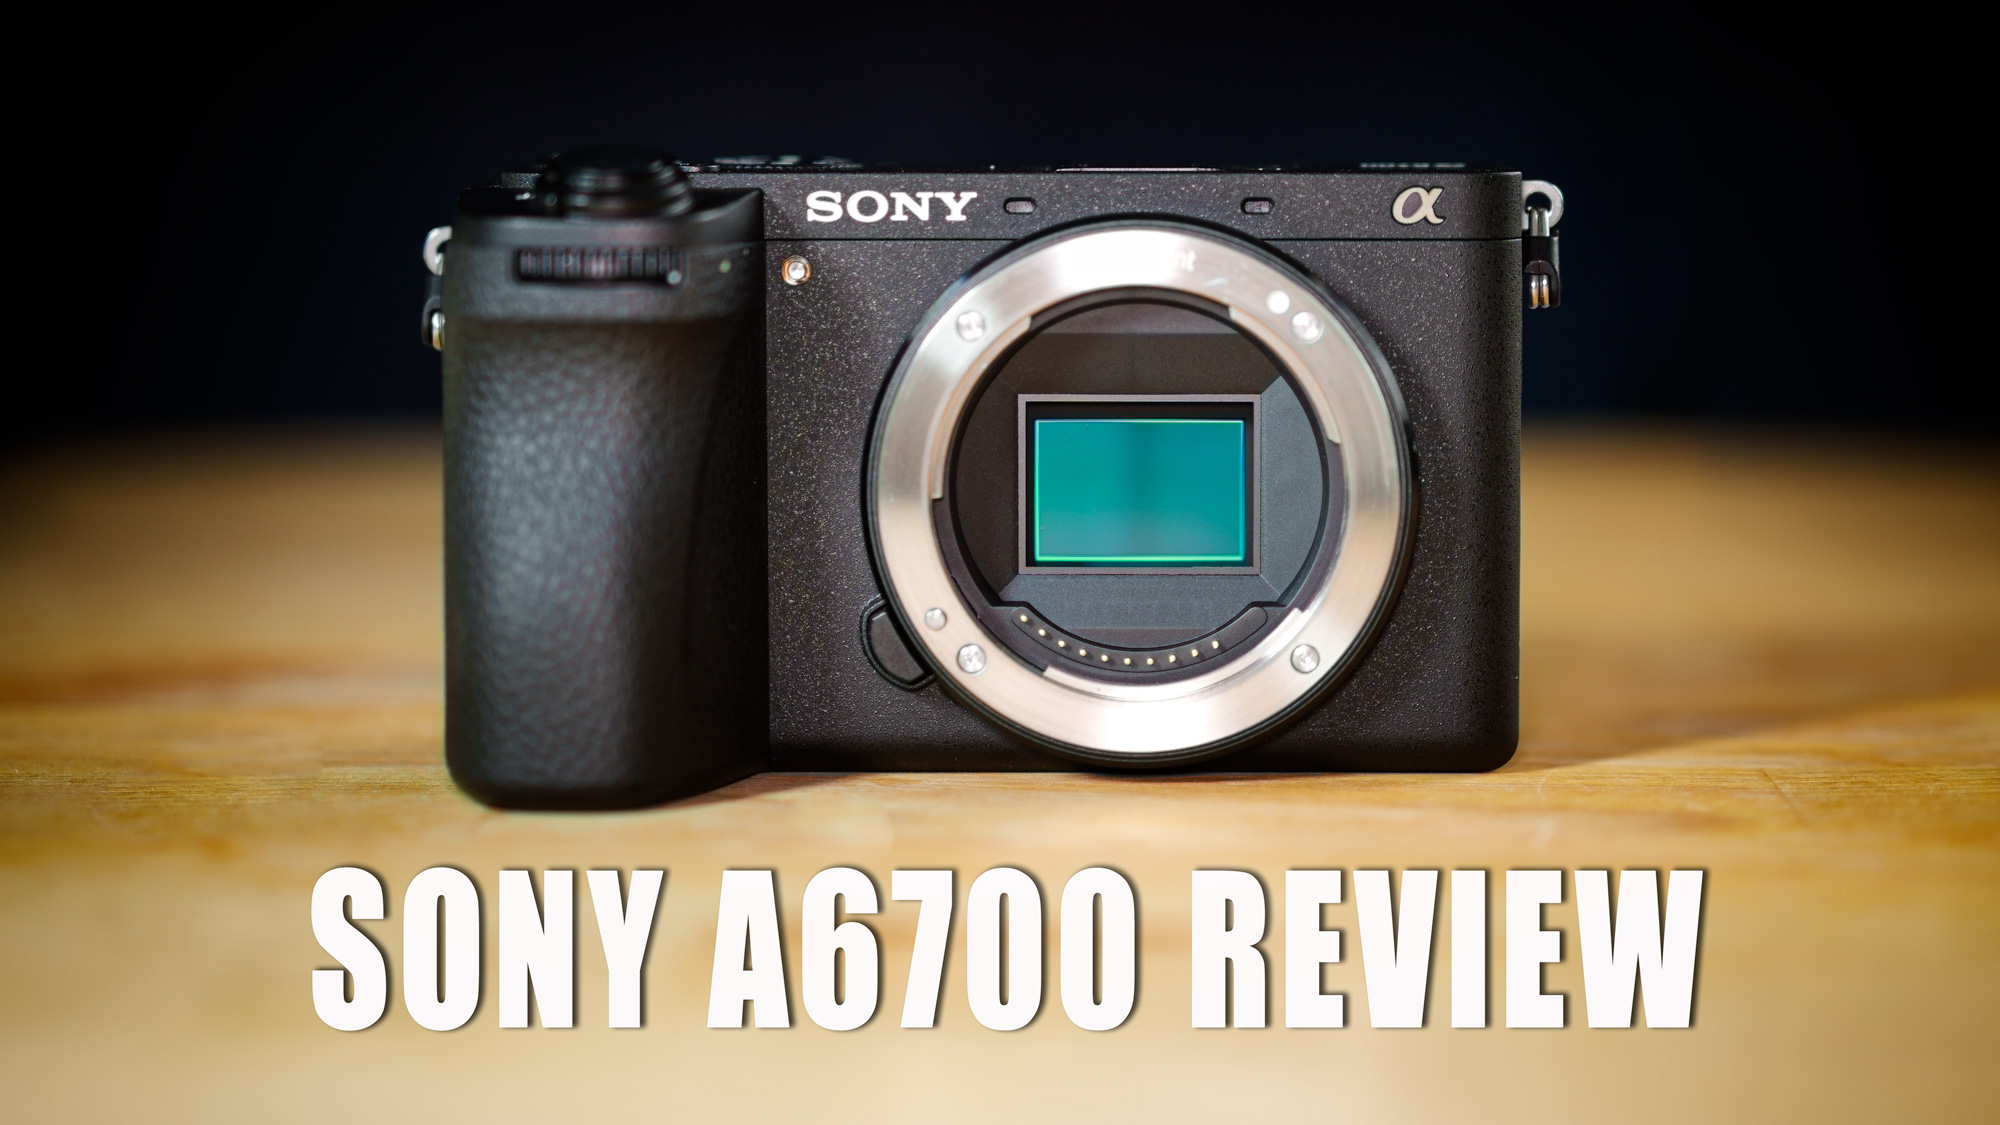 Sony a6700 review: a fresh flagship for APS-C